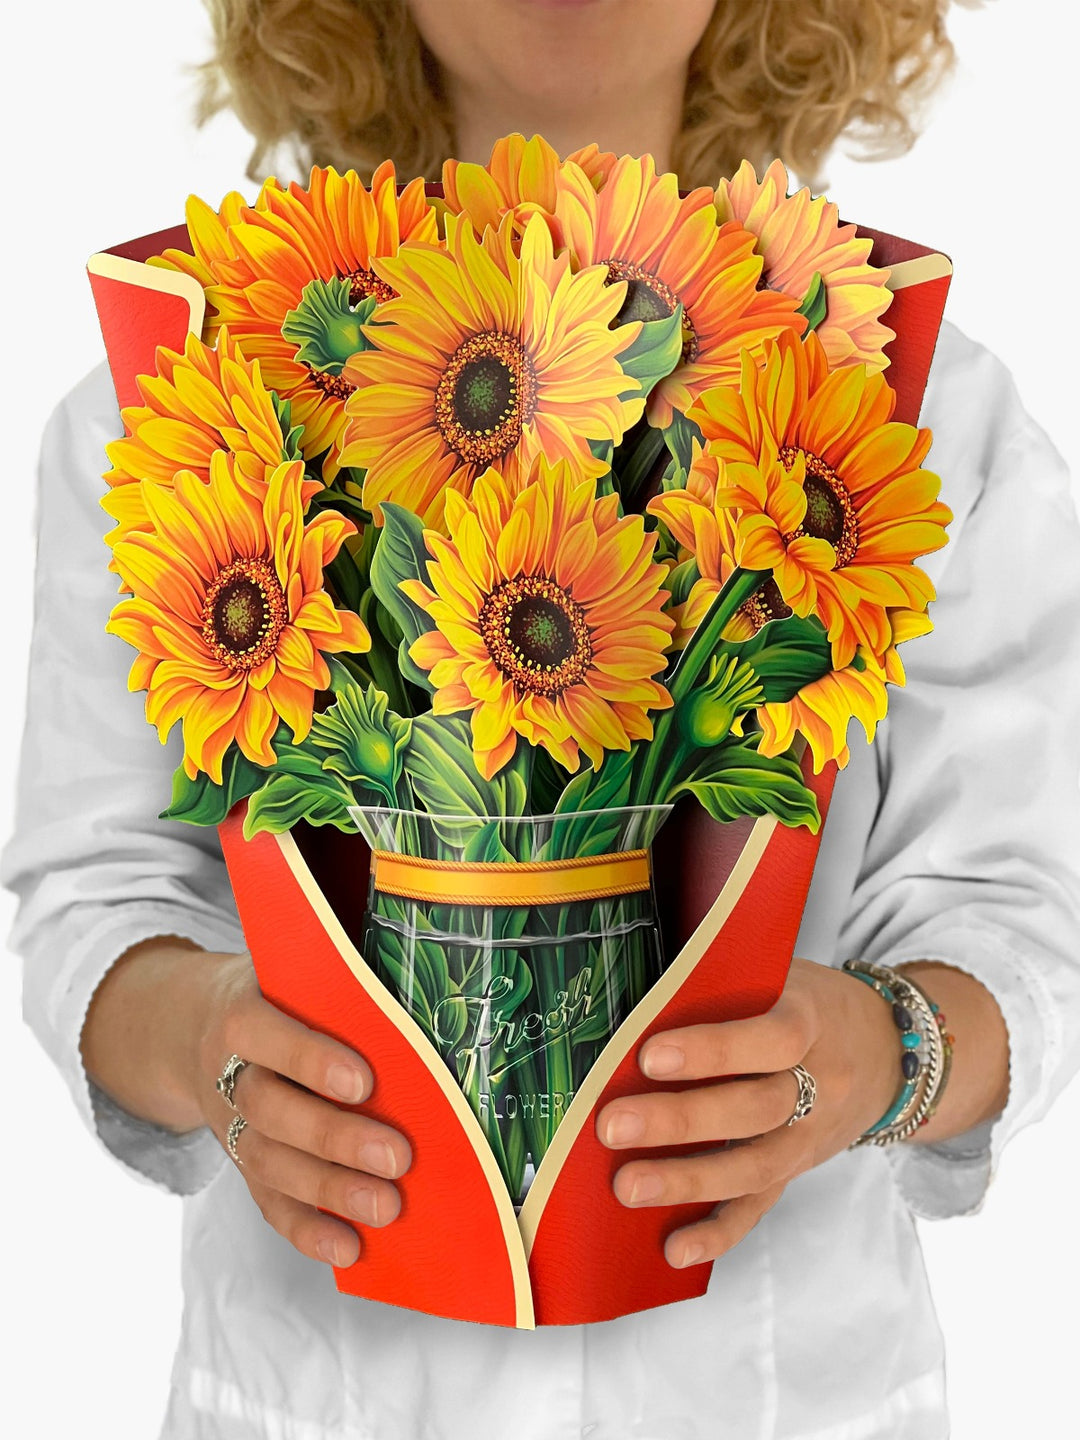 FreshCut Paper "Sunflowers" measure 12'' tall by 9" wide. Our stunning life sized, 3D pop up flowers include paper vase, matching note card and festive mailing envelope.